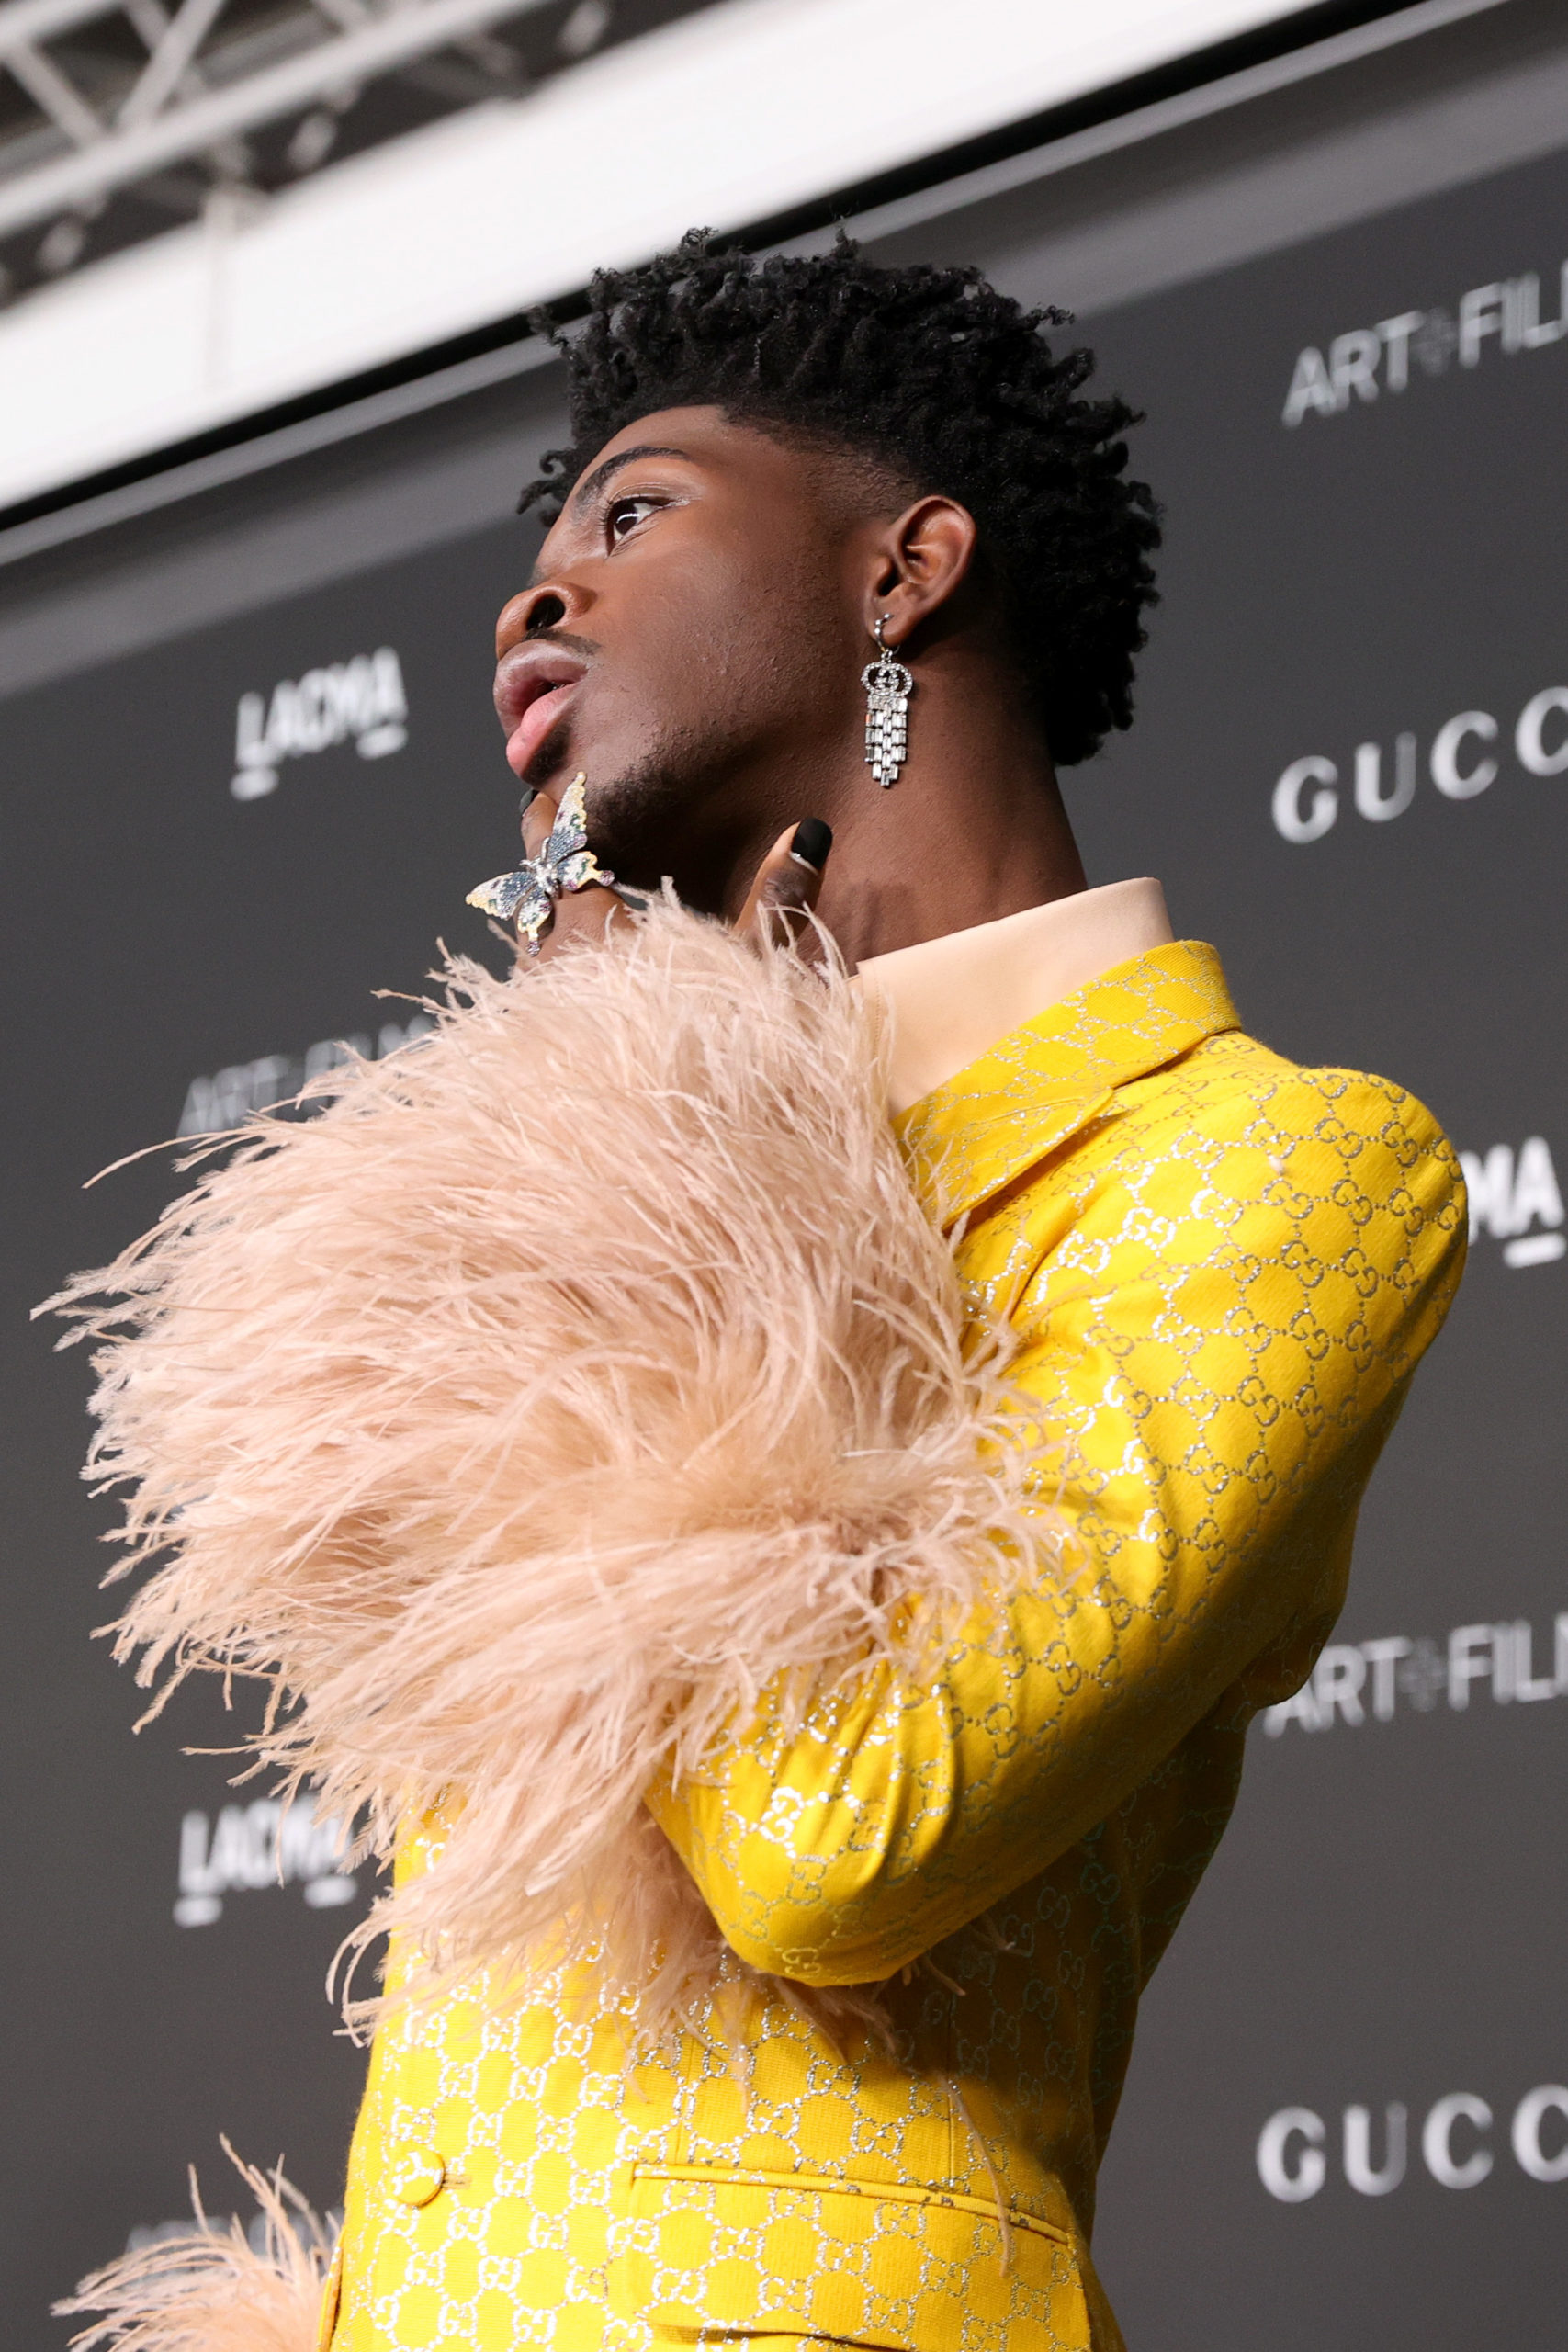  LOS ANGELES, CALIFORNIA - NOVEMBER 06: Lil Nas X, wearing Gucci, attends the 10th Annual LACMA ART+FILM GALA honoring Amy Sherald, Kehinde Wiley, and Steven Spielberg presented by Gucci at Los Angeles County Museum of Art on November 06, 2021 in Los Angeles, California. (Photo by Rich Fury/Getty Images for LACMA)